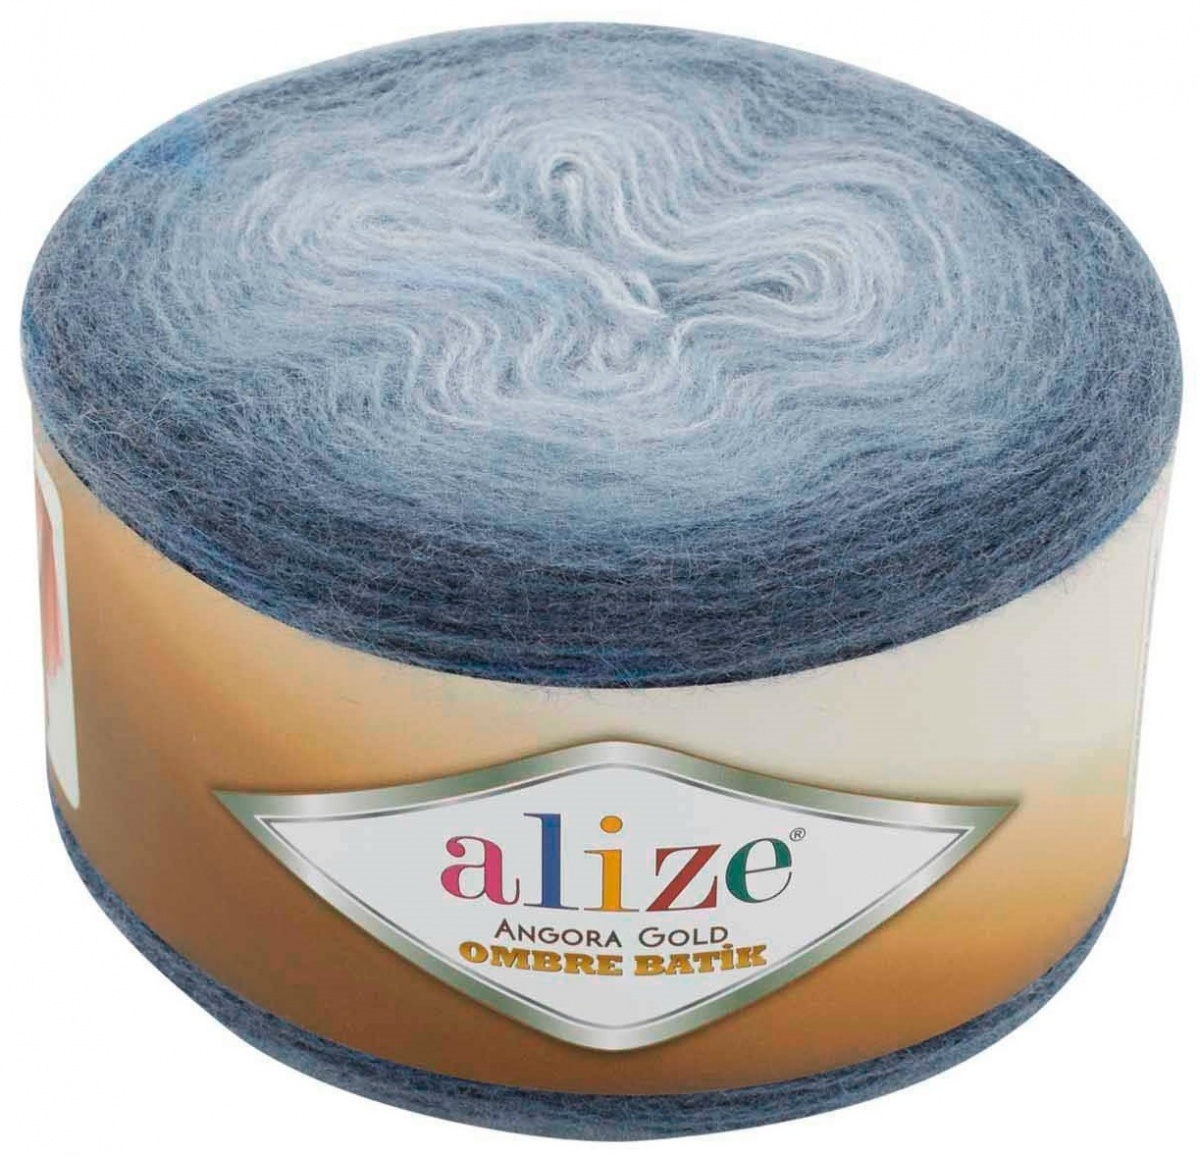 Alize Angora Gold Ombre Batik, 20% Wool, 80% Acrylic 4 Skein Value Pack, 600g фото 19